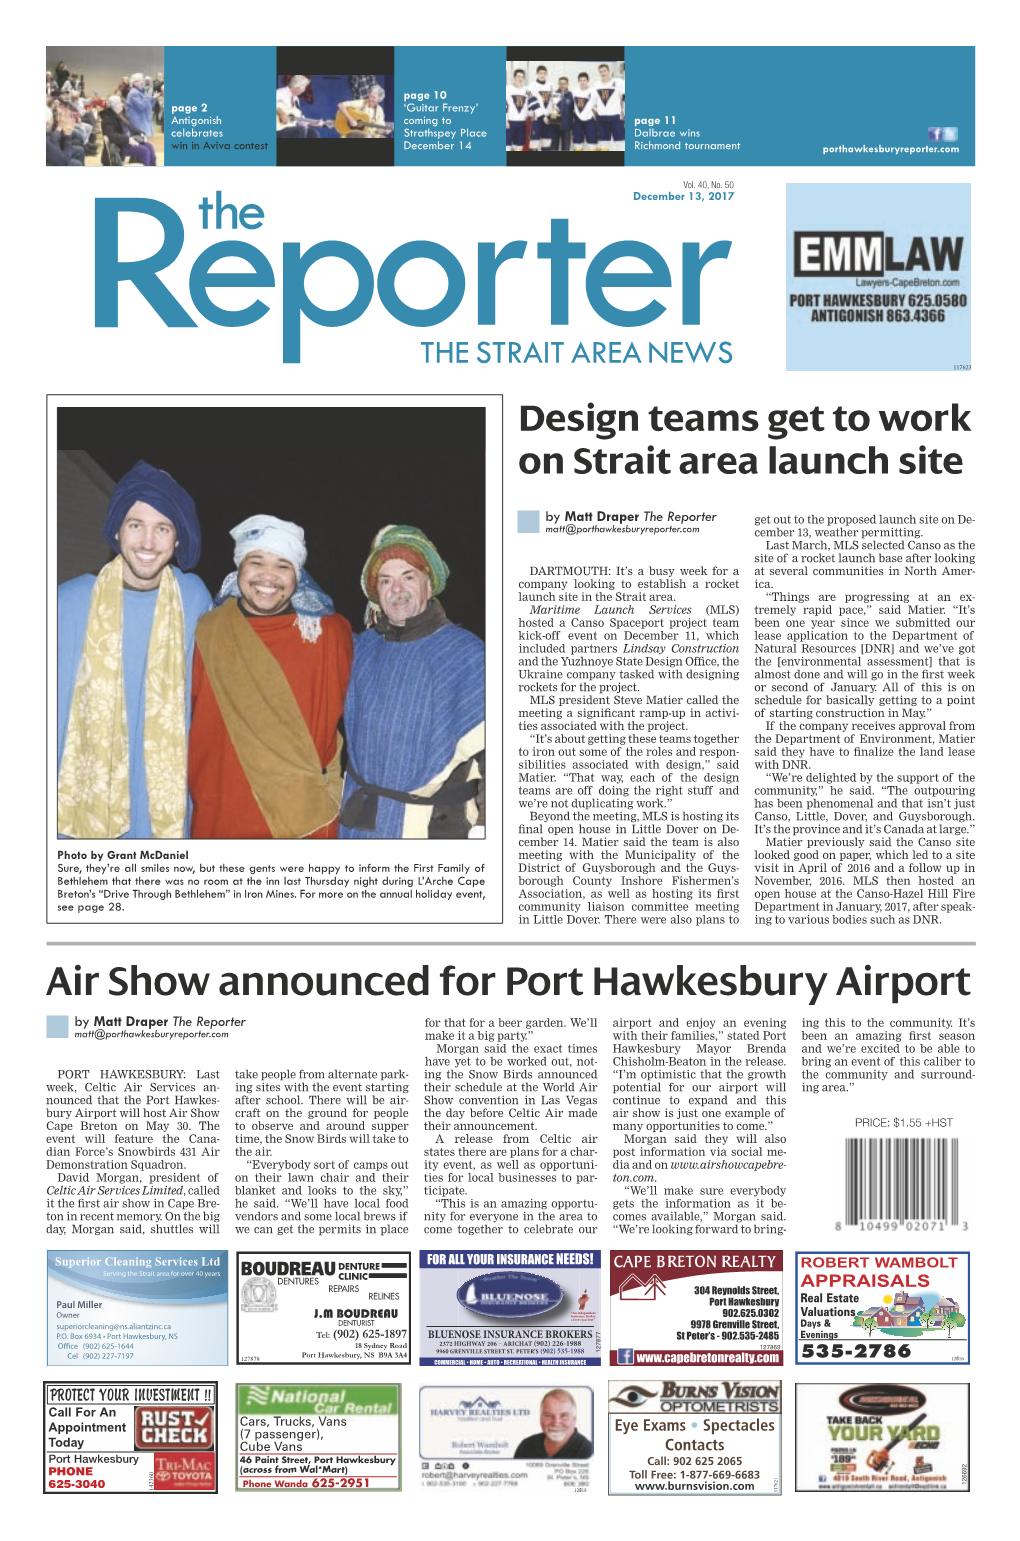 Air Show Announced for Port Hawkesbury Airport